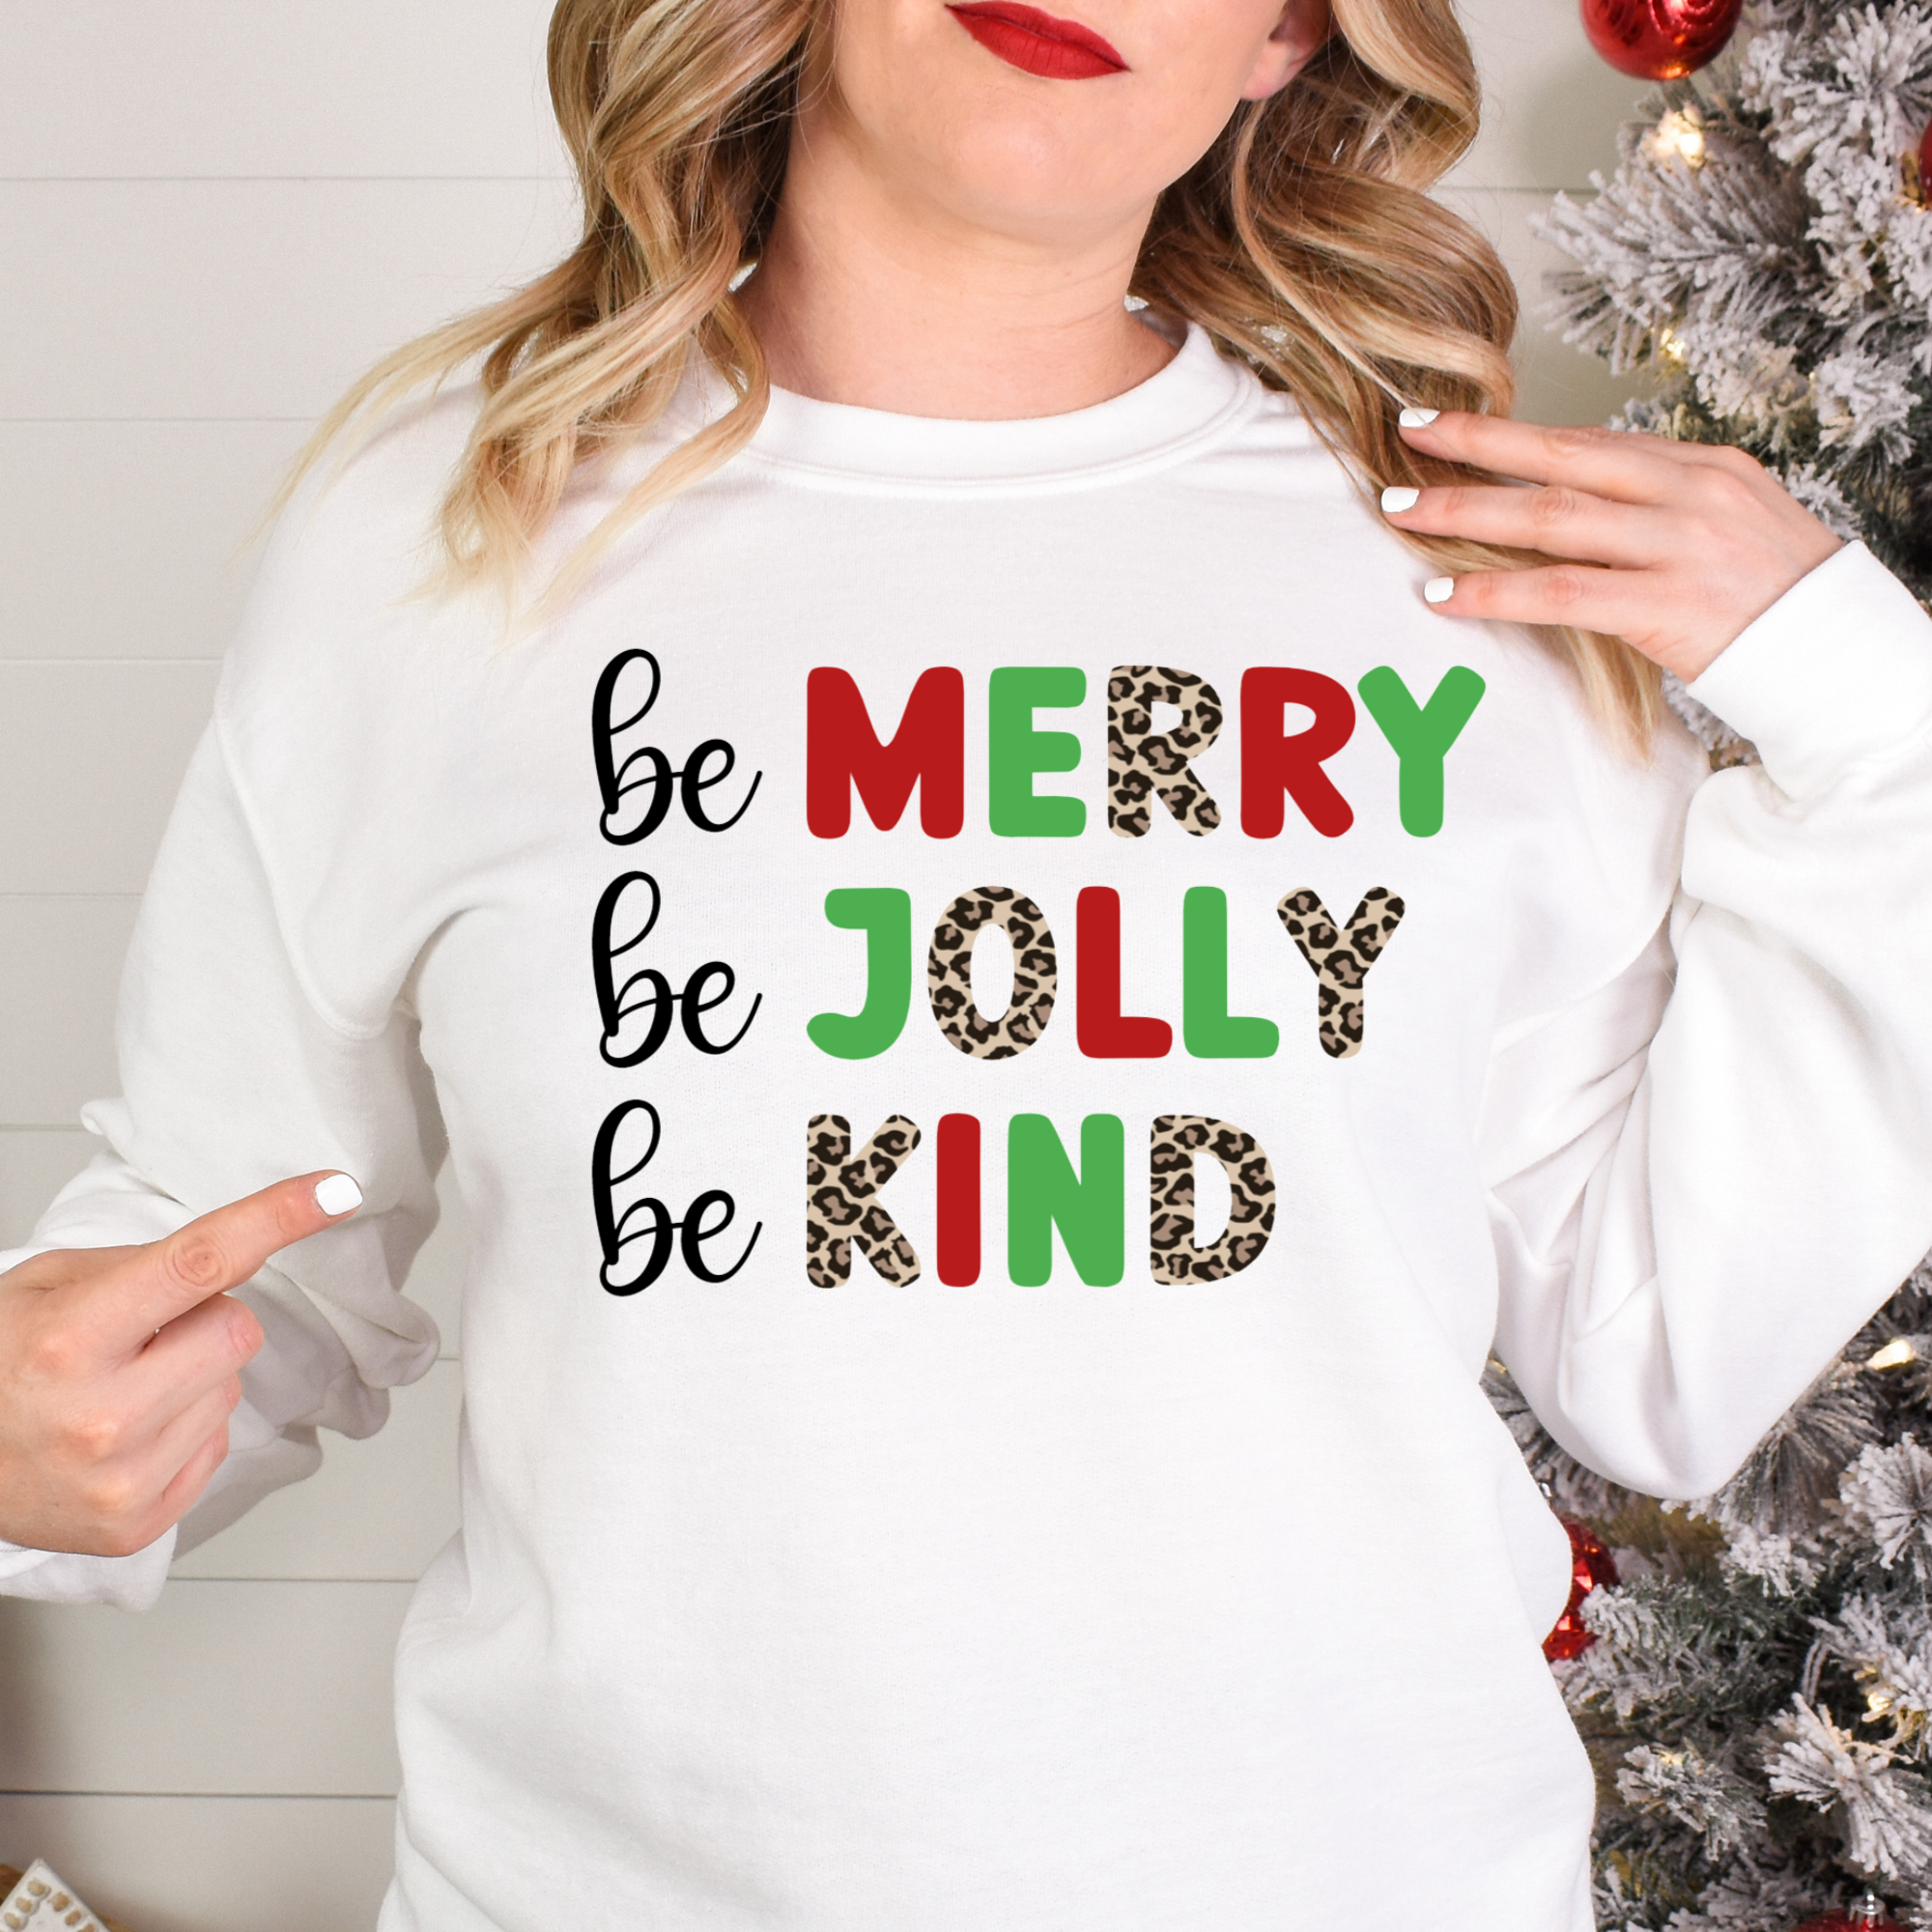 Be Merry Be Jolly Be Kind Shirt